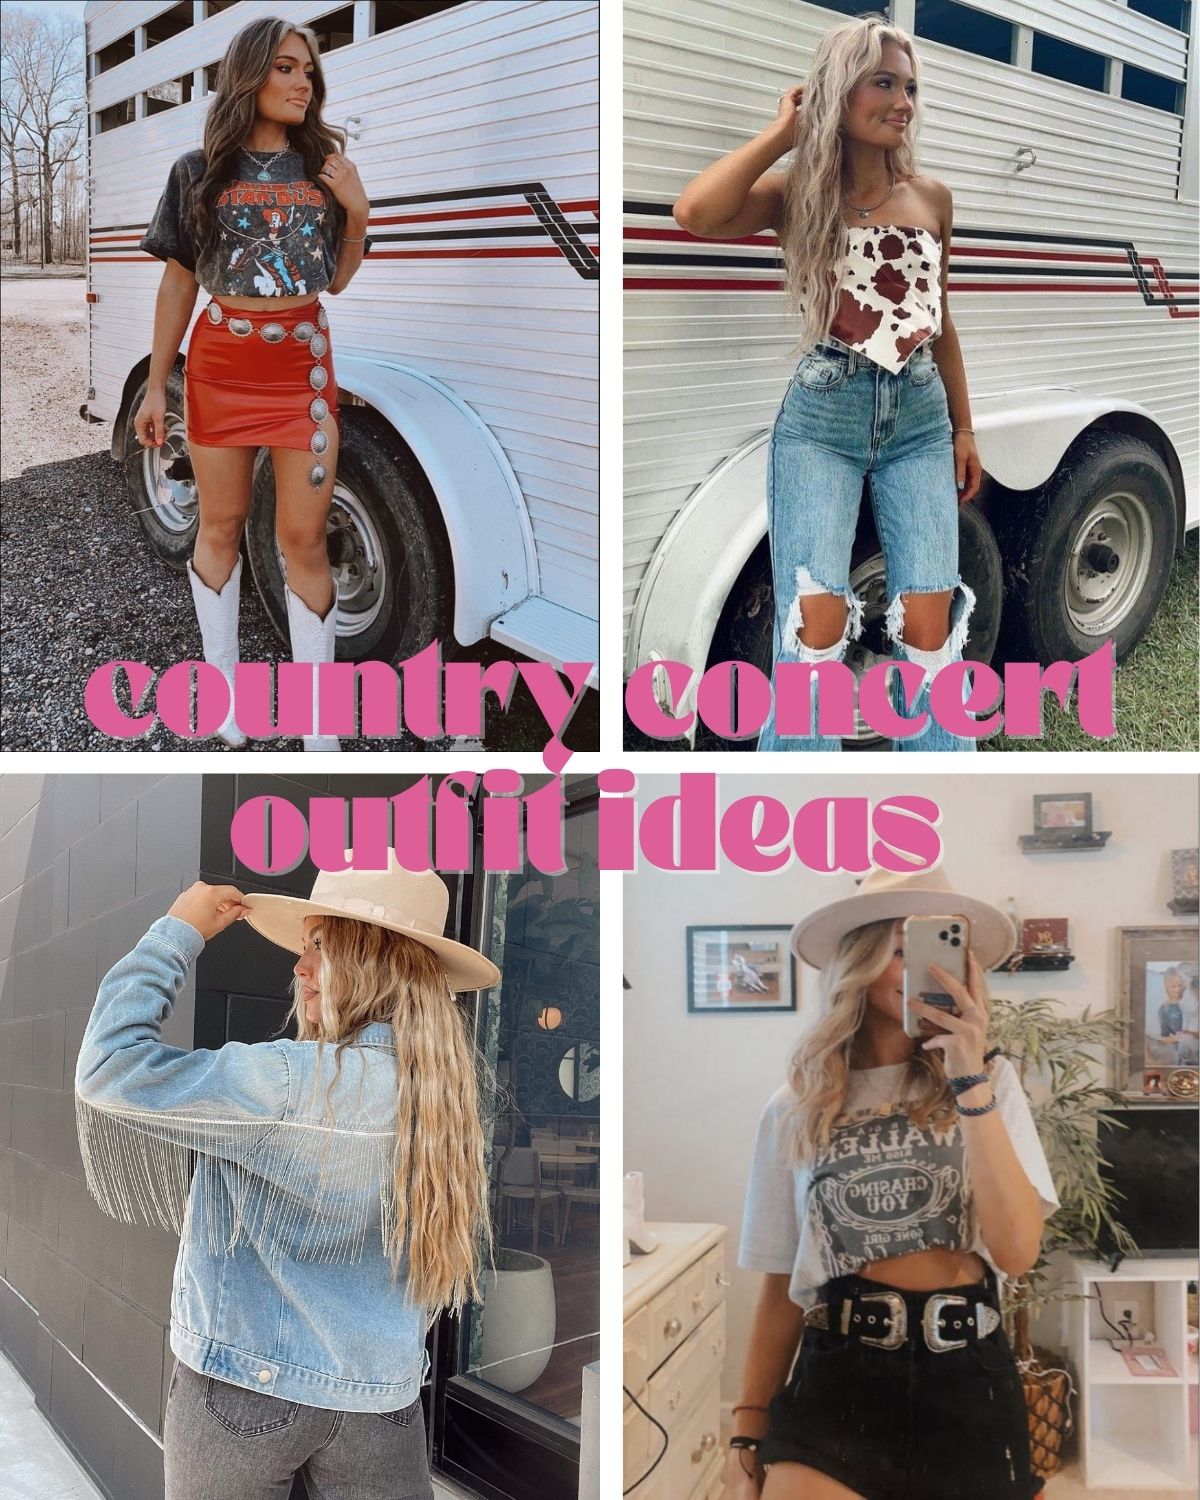 Four girls in country outfits